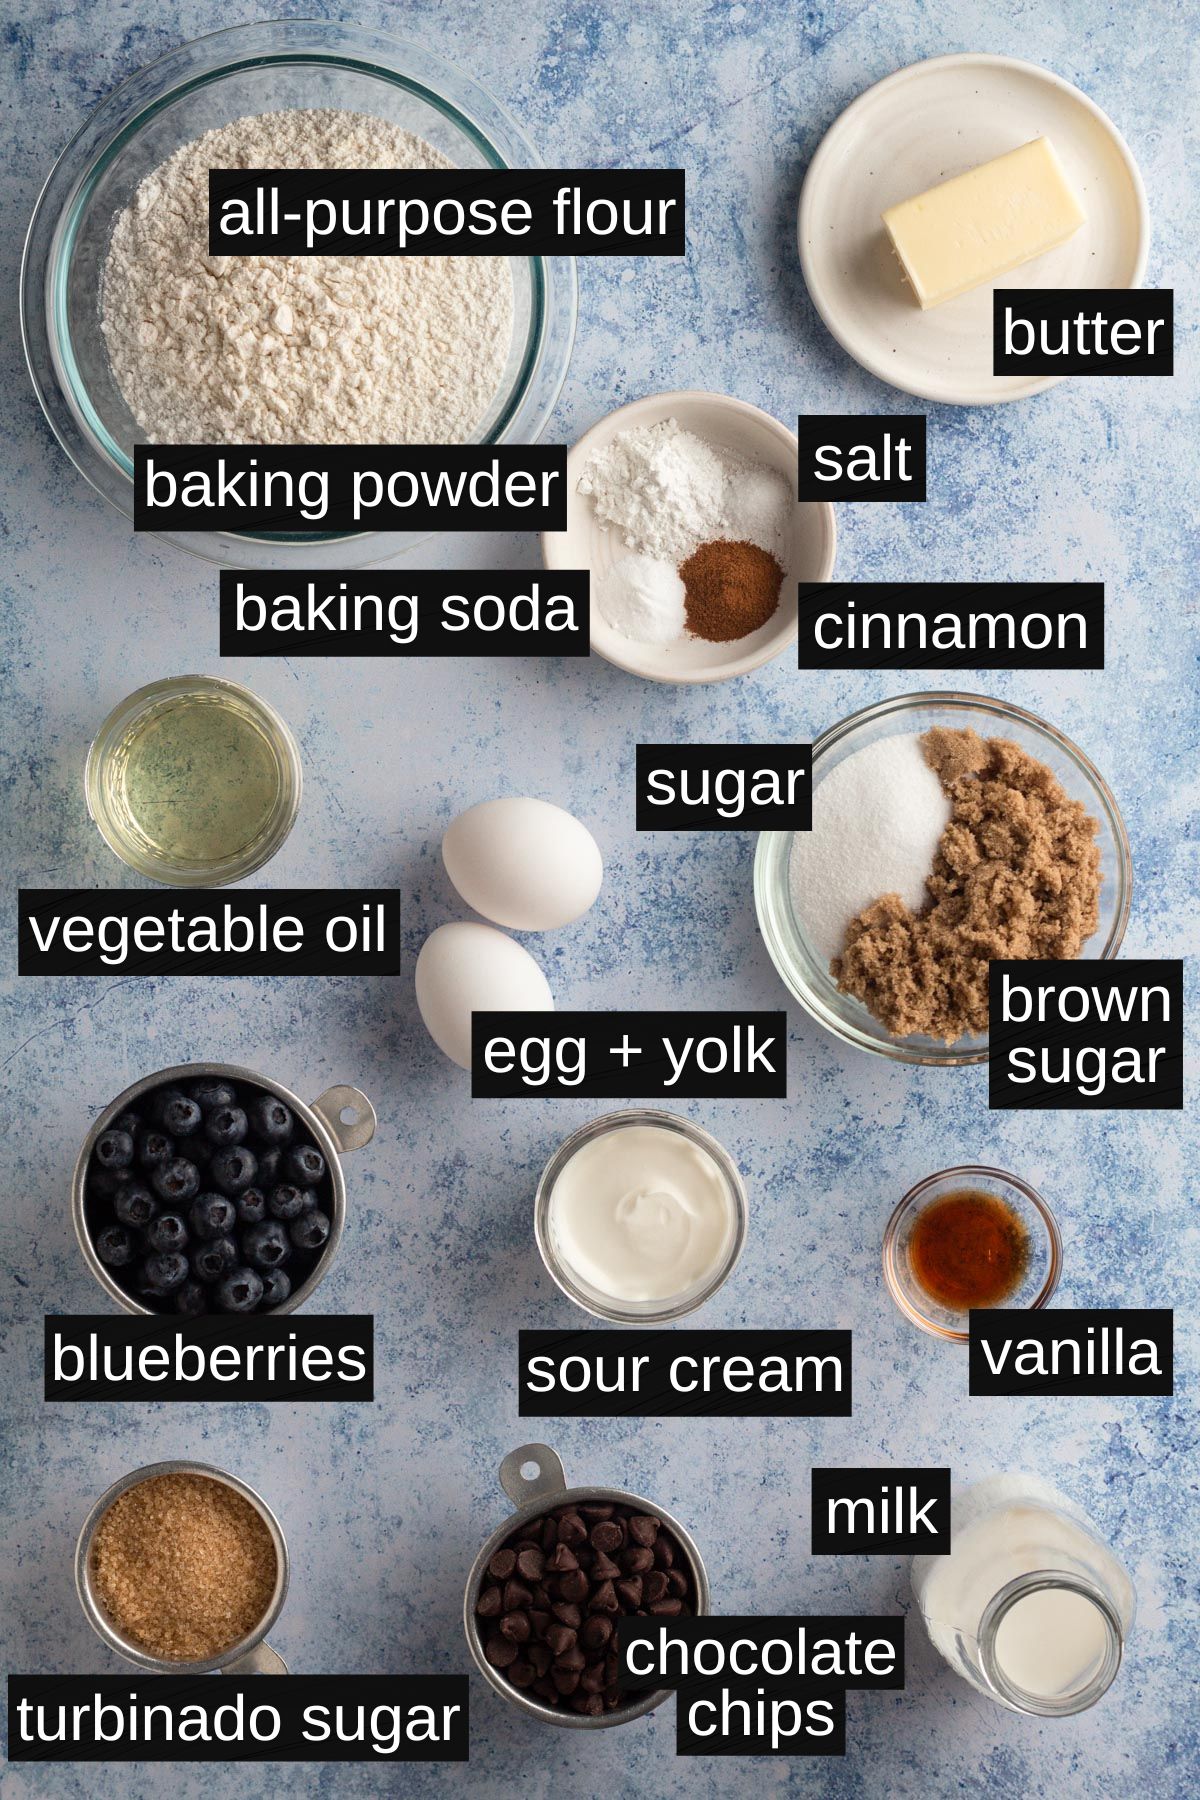 Recipe ingredients with labels on a blue surface.